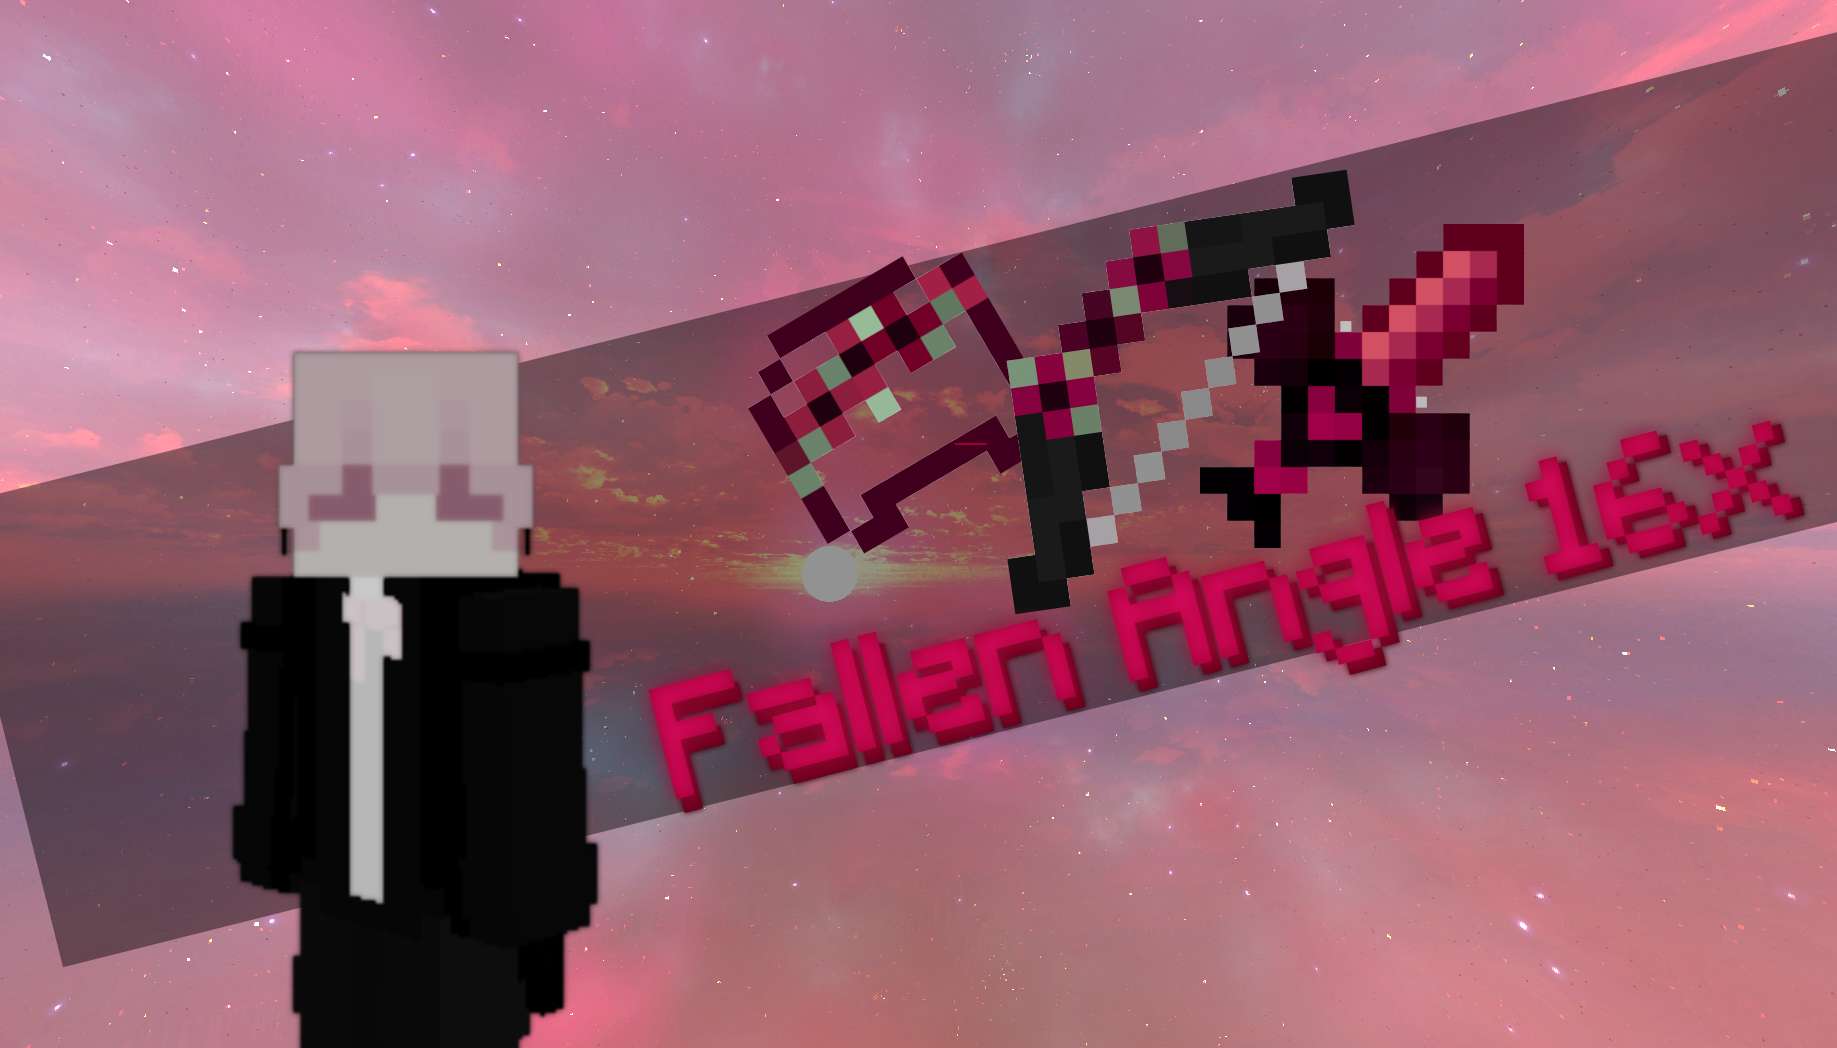 §b Fallen Angle  16x by Urzai on PvPRP